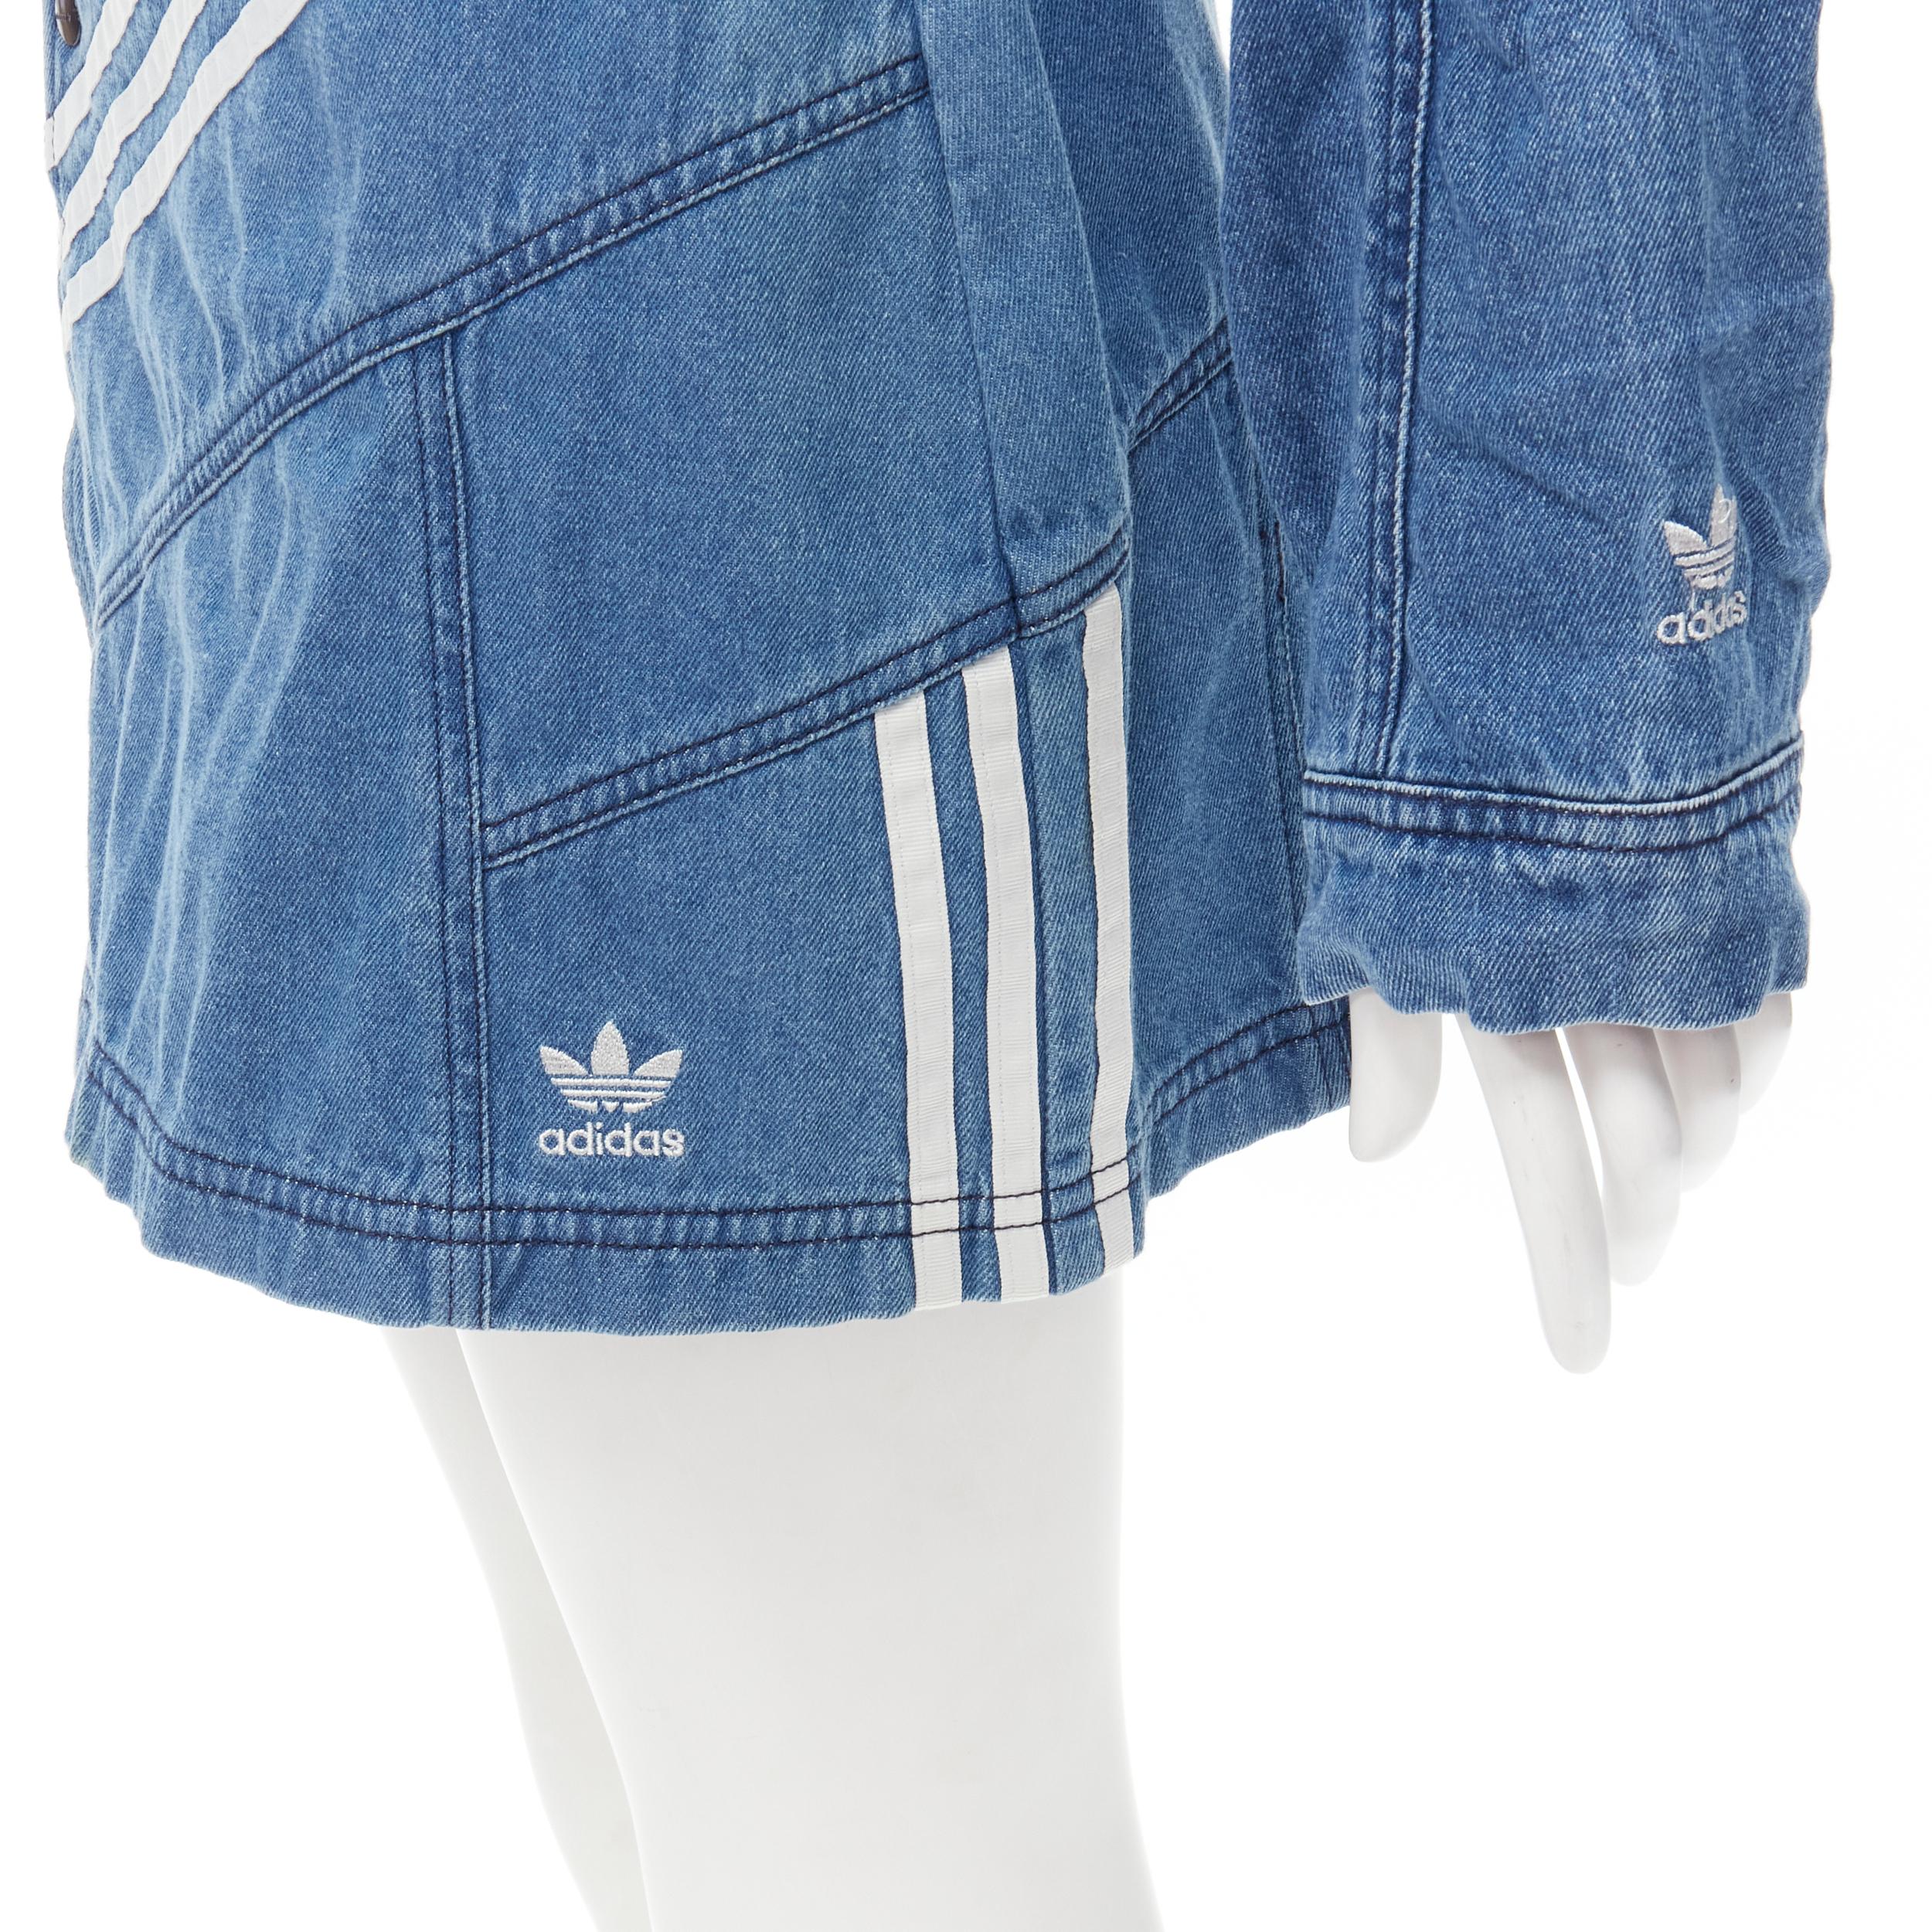 ADIDAS DANIELLE CATHARI blue denim patchwork cropped jacket mini skirt set S
Reference: ANWU/A00427
Brand: Adidas
Designer: Danielle Cathari
Material: Denim
Color: Blue
Pattern: Solid
Closure: Snap  button

CONDITION:
Condition: Excellent, this item